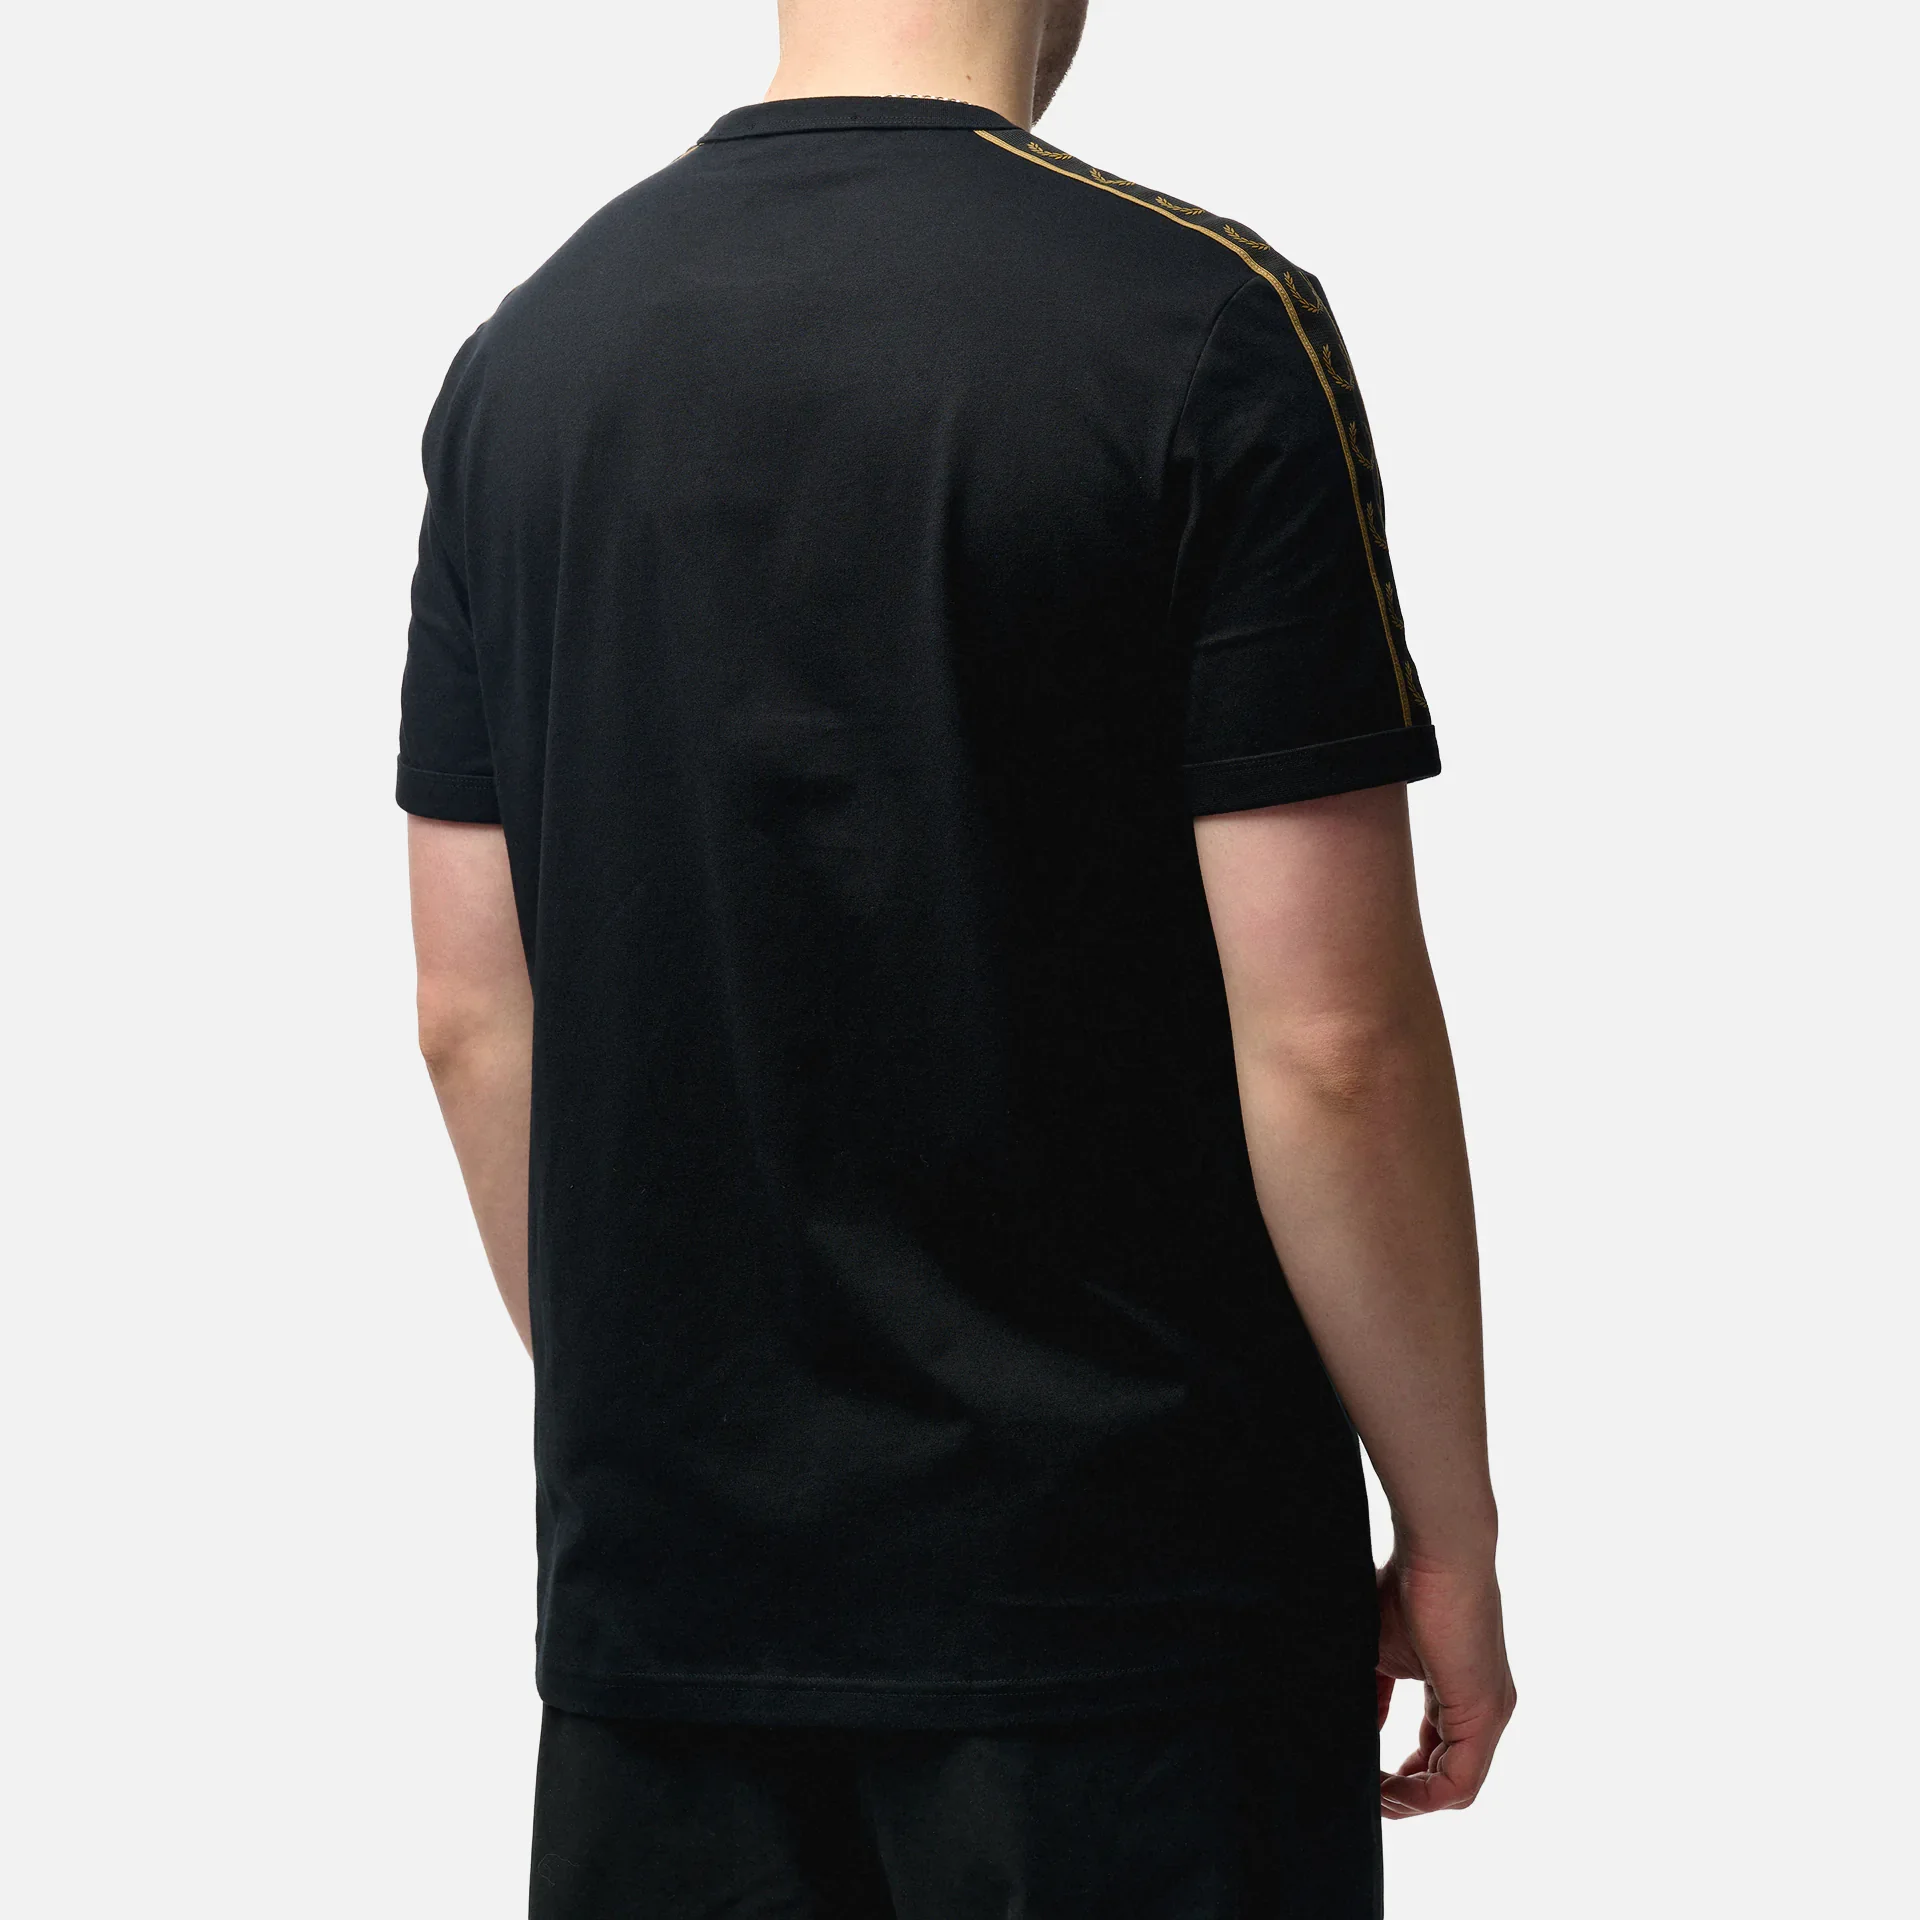 Fred Perry Contrast Tape Ringer T-Shirt Black/Warm Stone